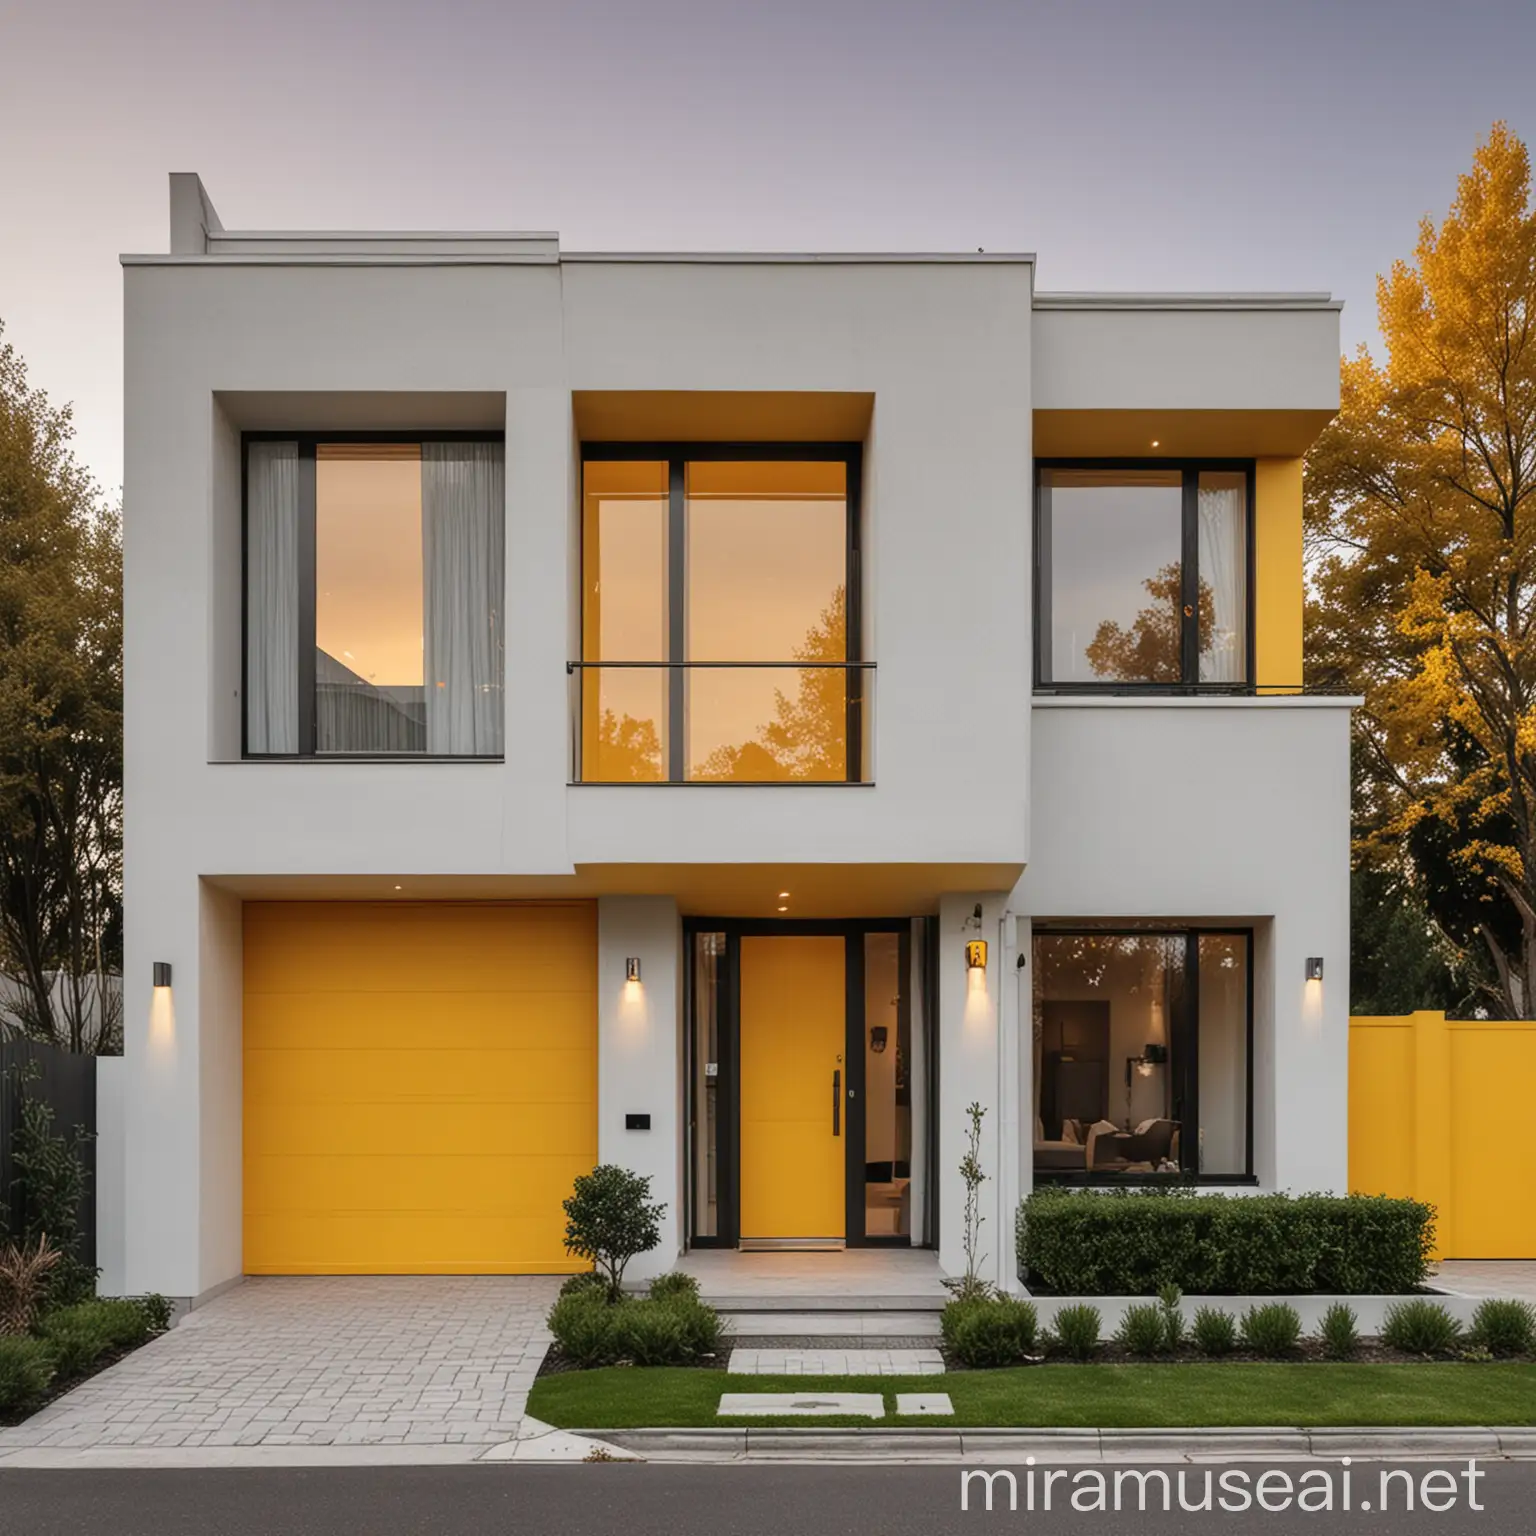 Make a luxury modern home facade with yellow details